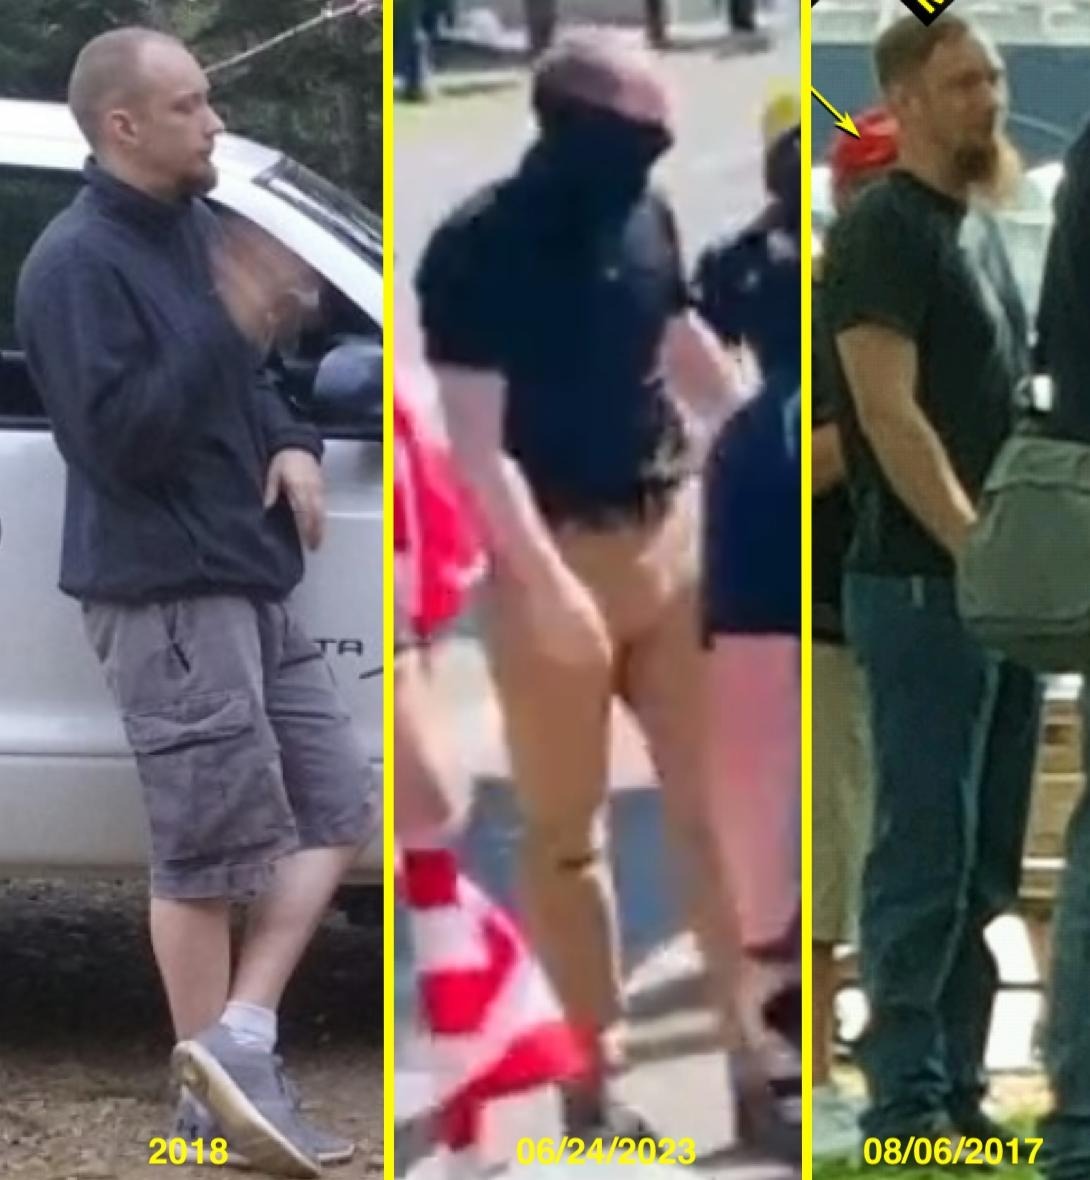 A series of pictures of Michael Dorsey.  The first is from 2018 while he leans against his truck, the second is after being unmasked during a fight with the Proud Boys in 2023, and the third is Dorsey in 2018.  He has the same distinctive receding hairline in all three pictures.